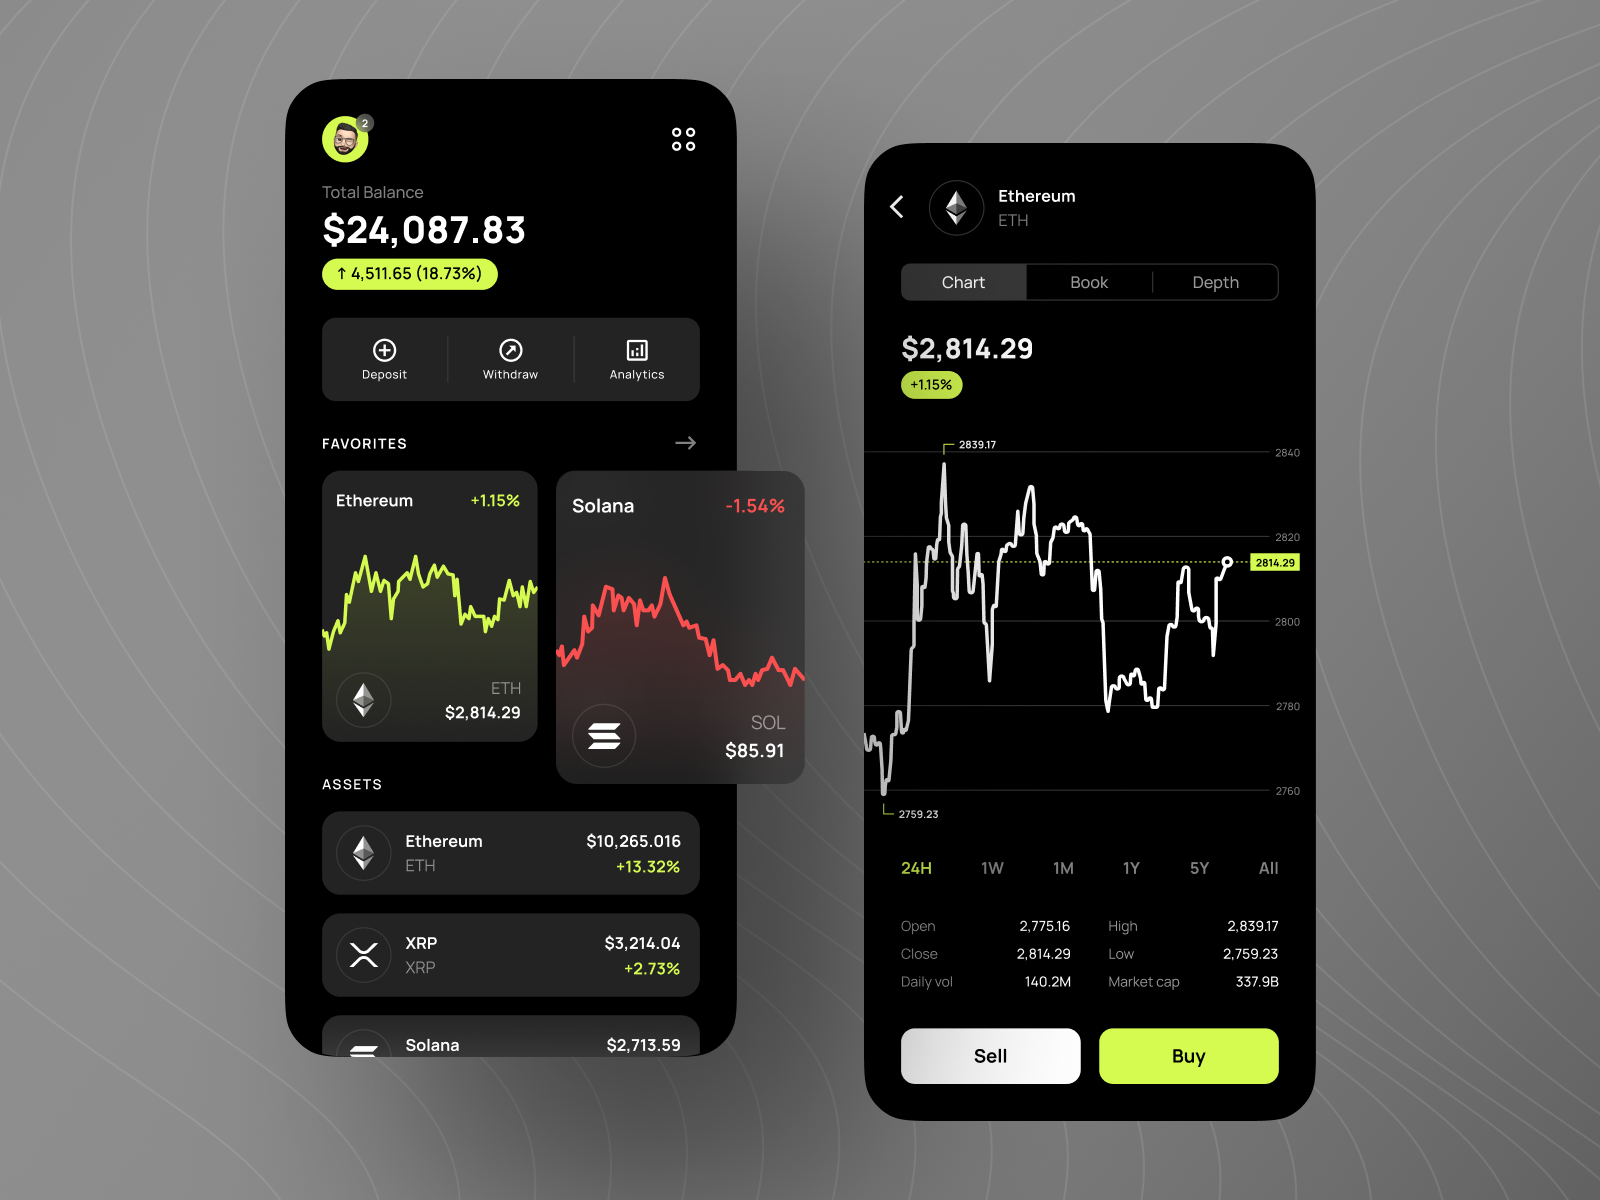 Endless design of cryptocurrencies wallets and trading platforms on mobile. Trendy mix of lime and black background